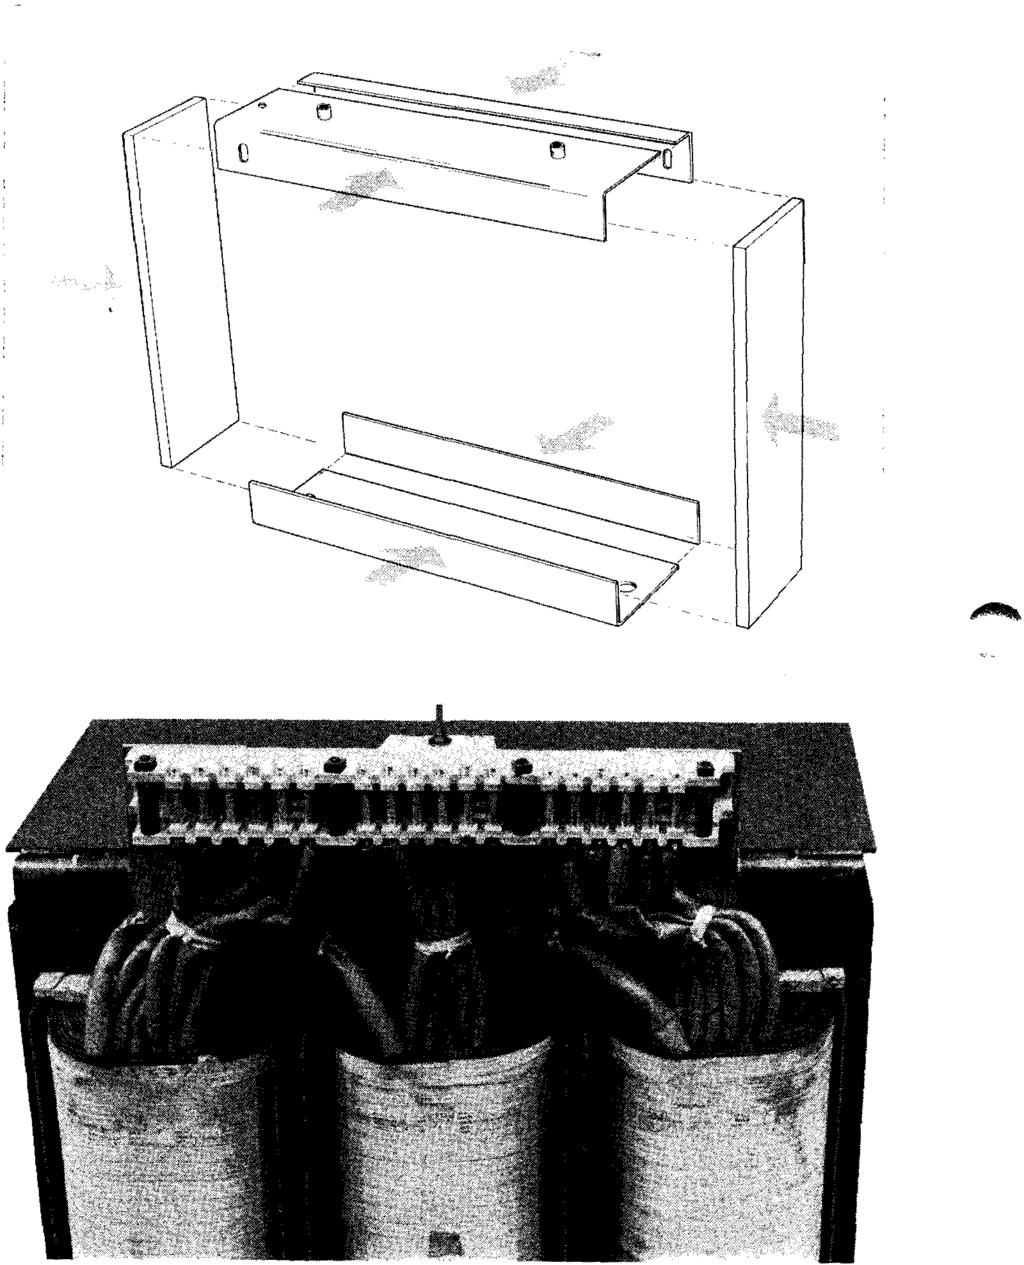 DB 48-150 Page 6 Westinghouse Core and Coil Supporting Structures The functional design six piece supporting structure for the core a nd coils is assembled in a pressure jig around the core and coils